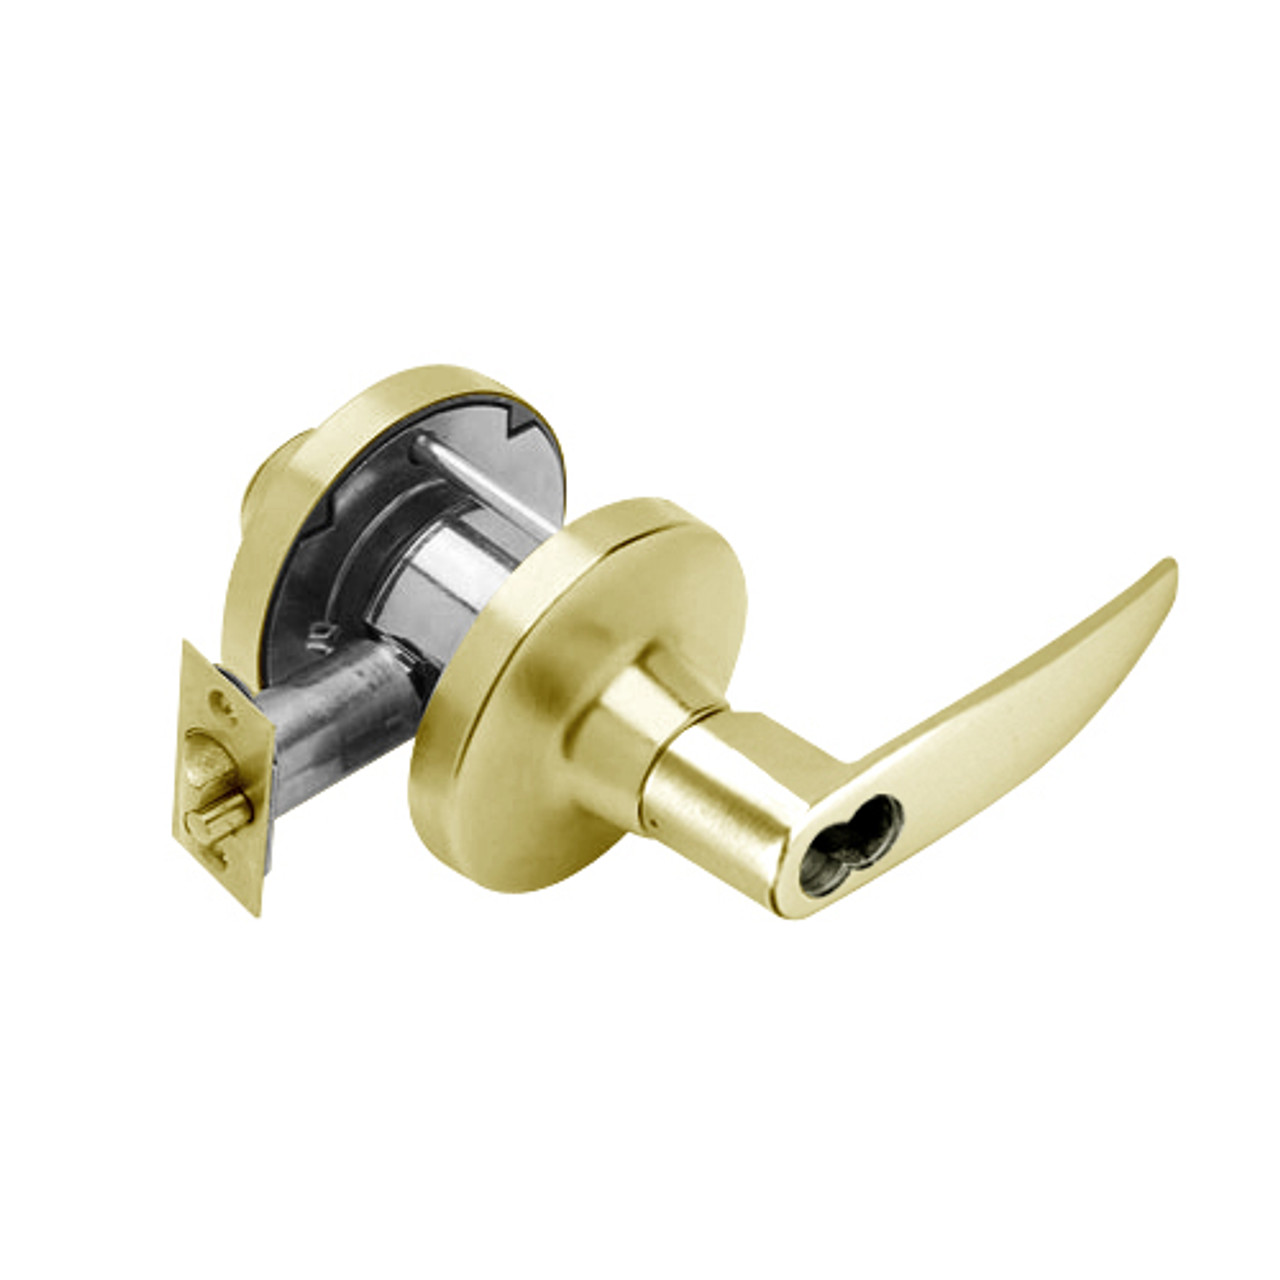 T351BD-A-606 Falcon T Series Cylindrical Closet Lock with Avalon Lever Style Prepped for SFIC in Satin Brass Finish